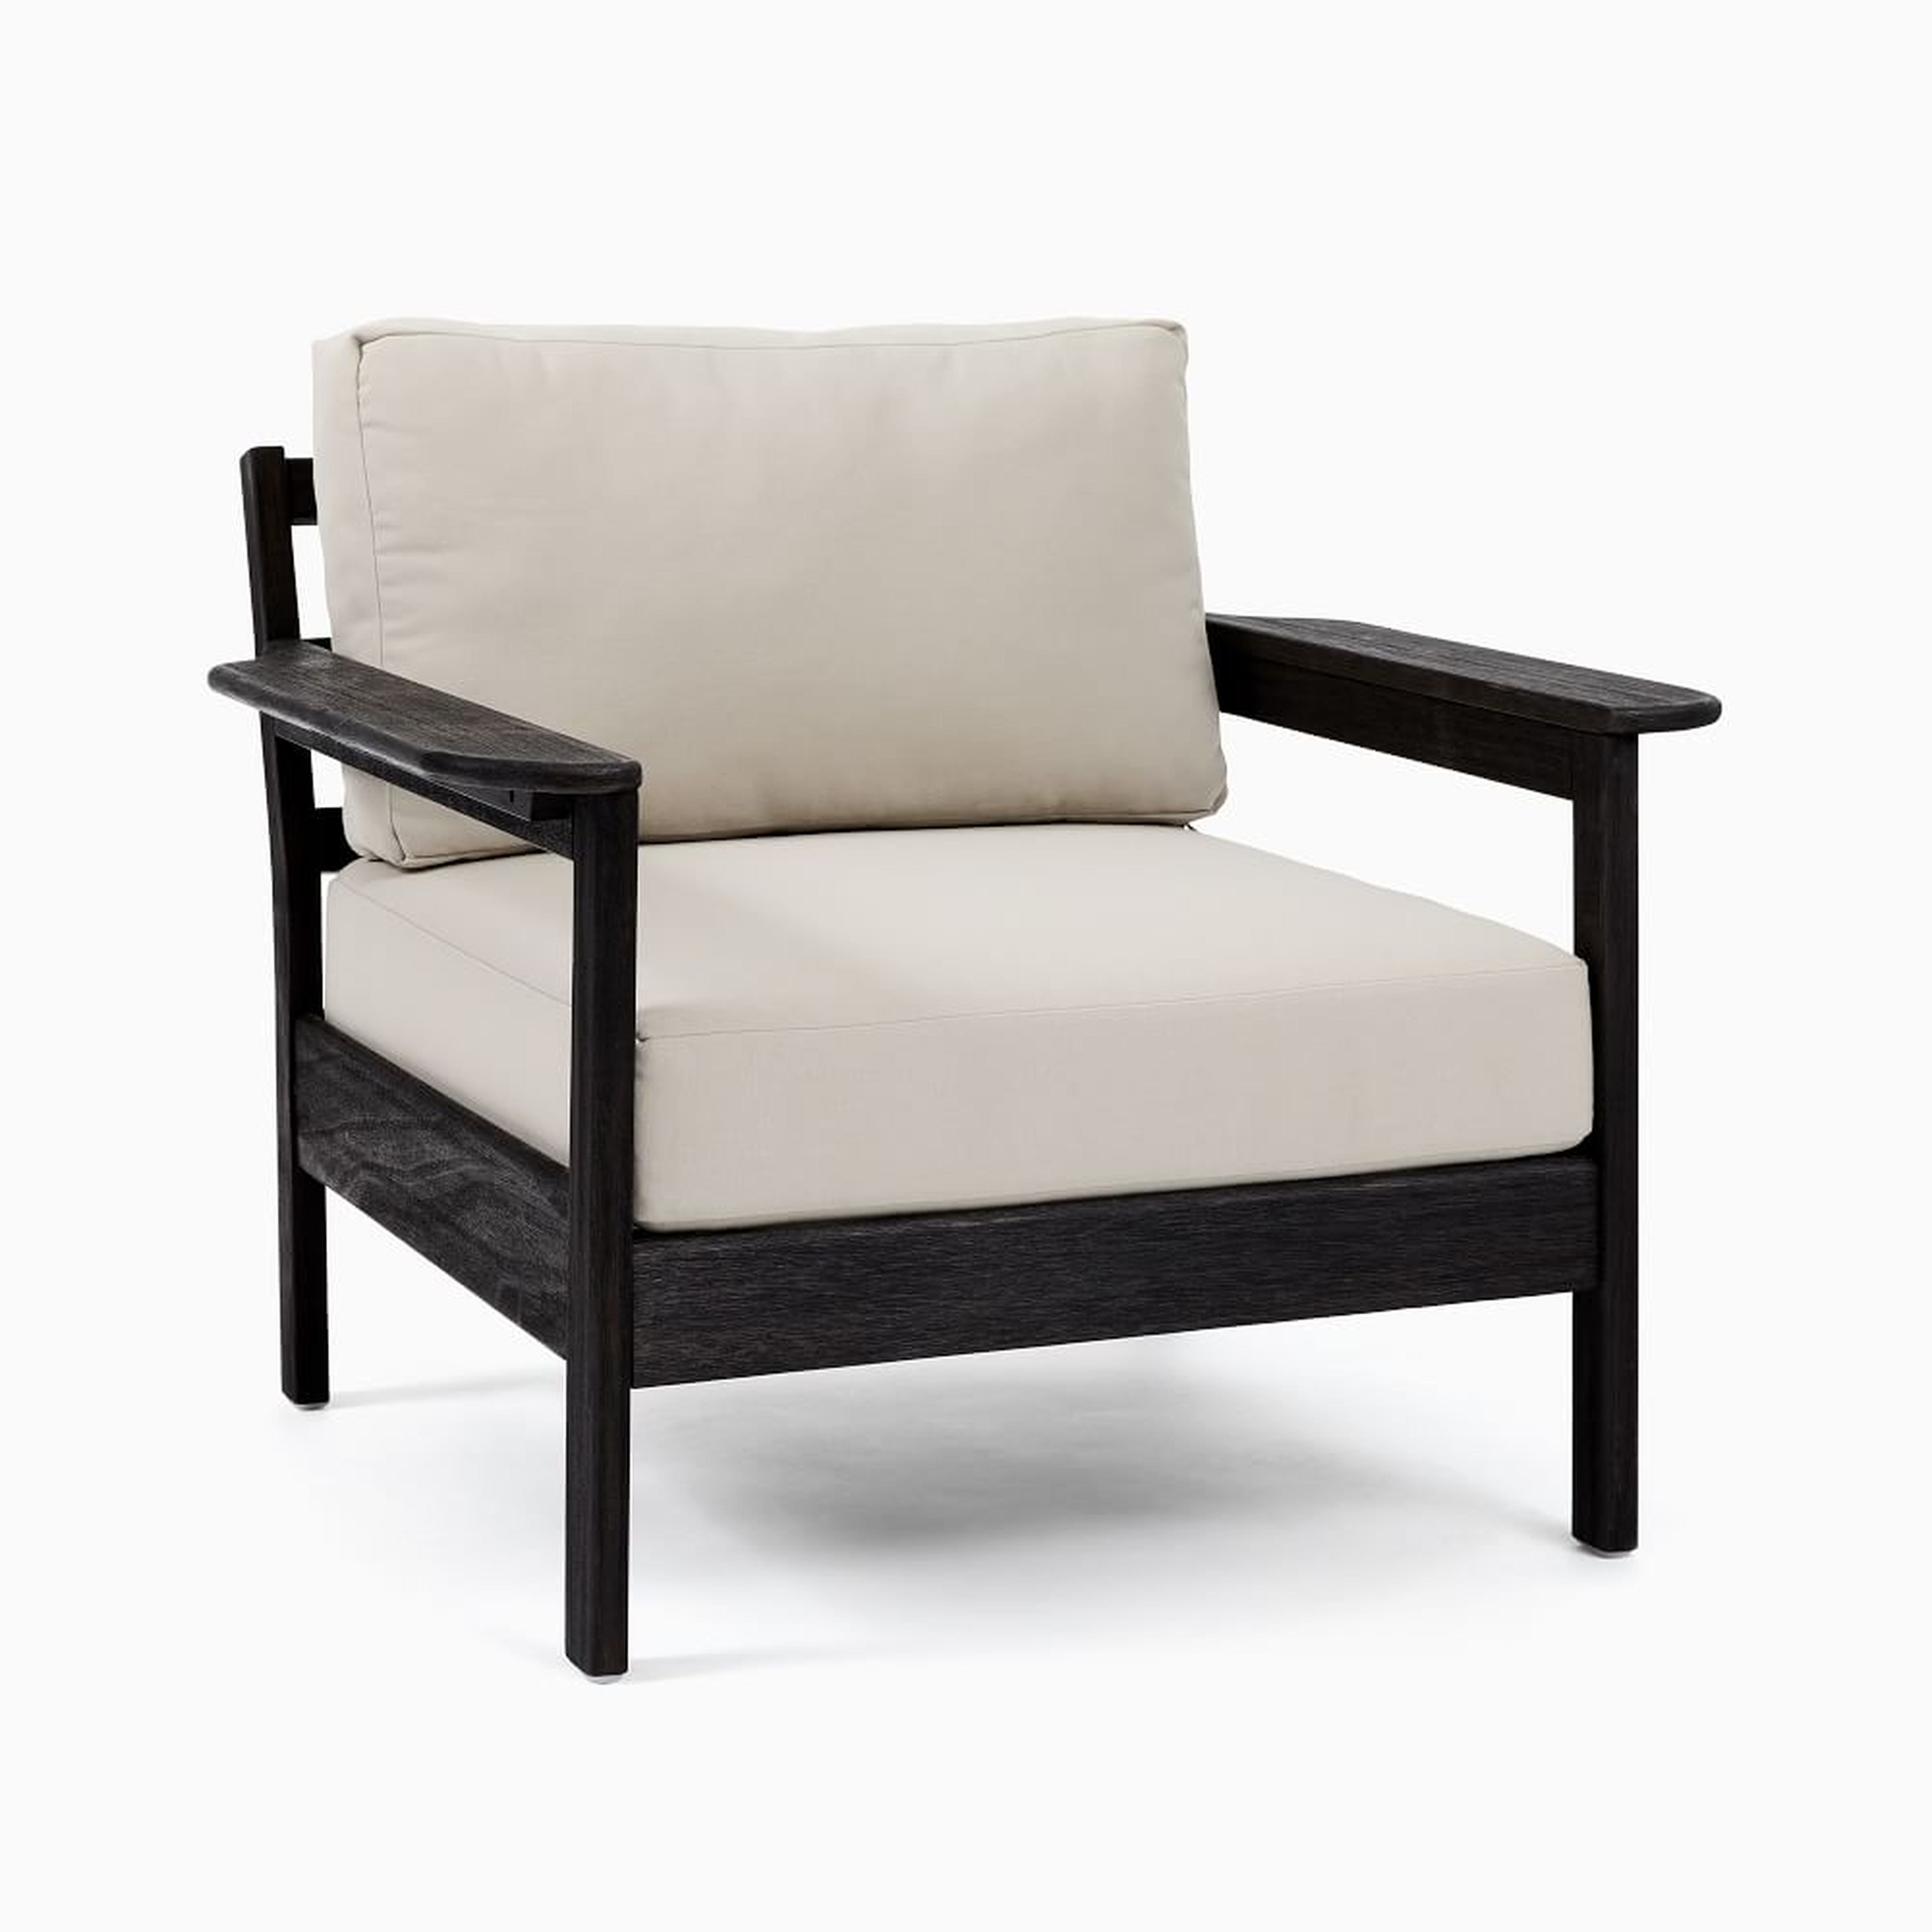 Playa Lounge Chair, Lounge Chair Pack, Weathered Black/Cement - West Elm